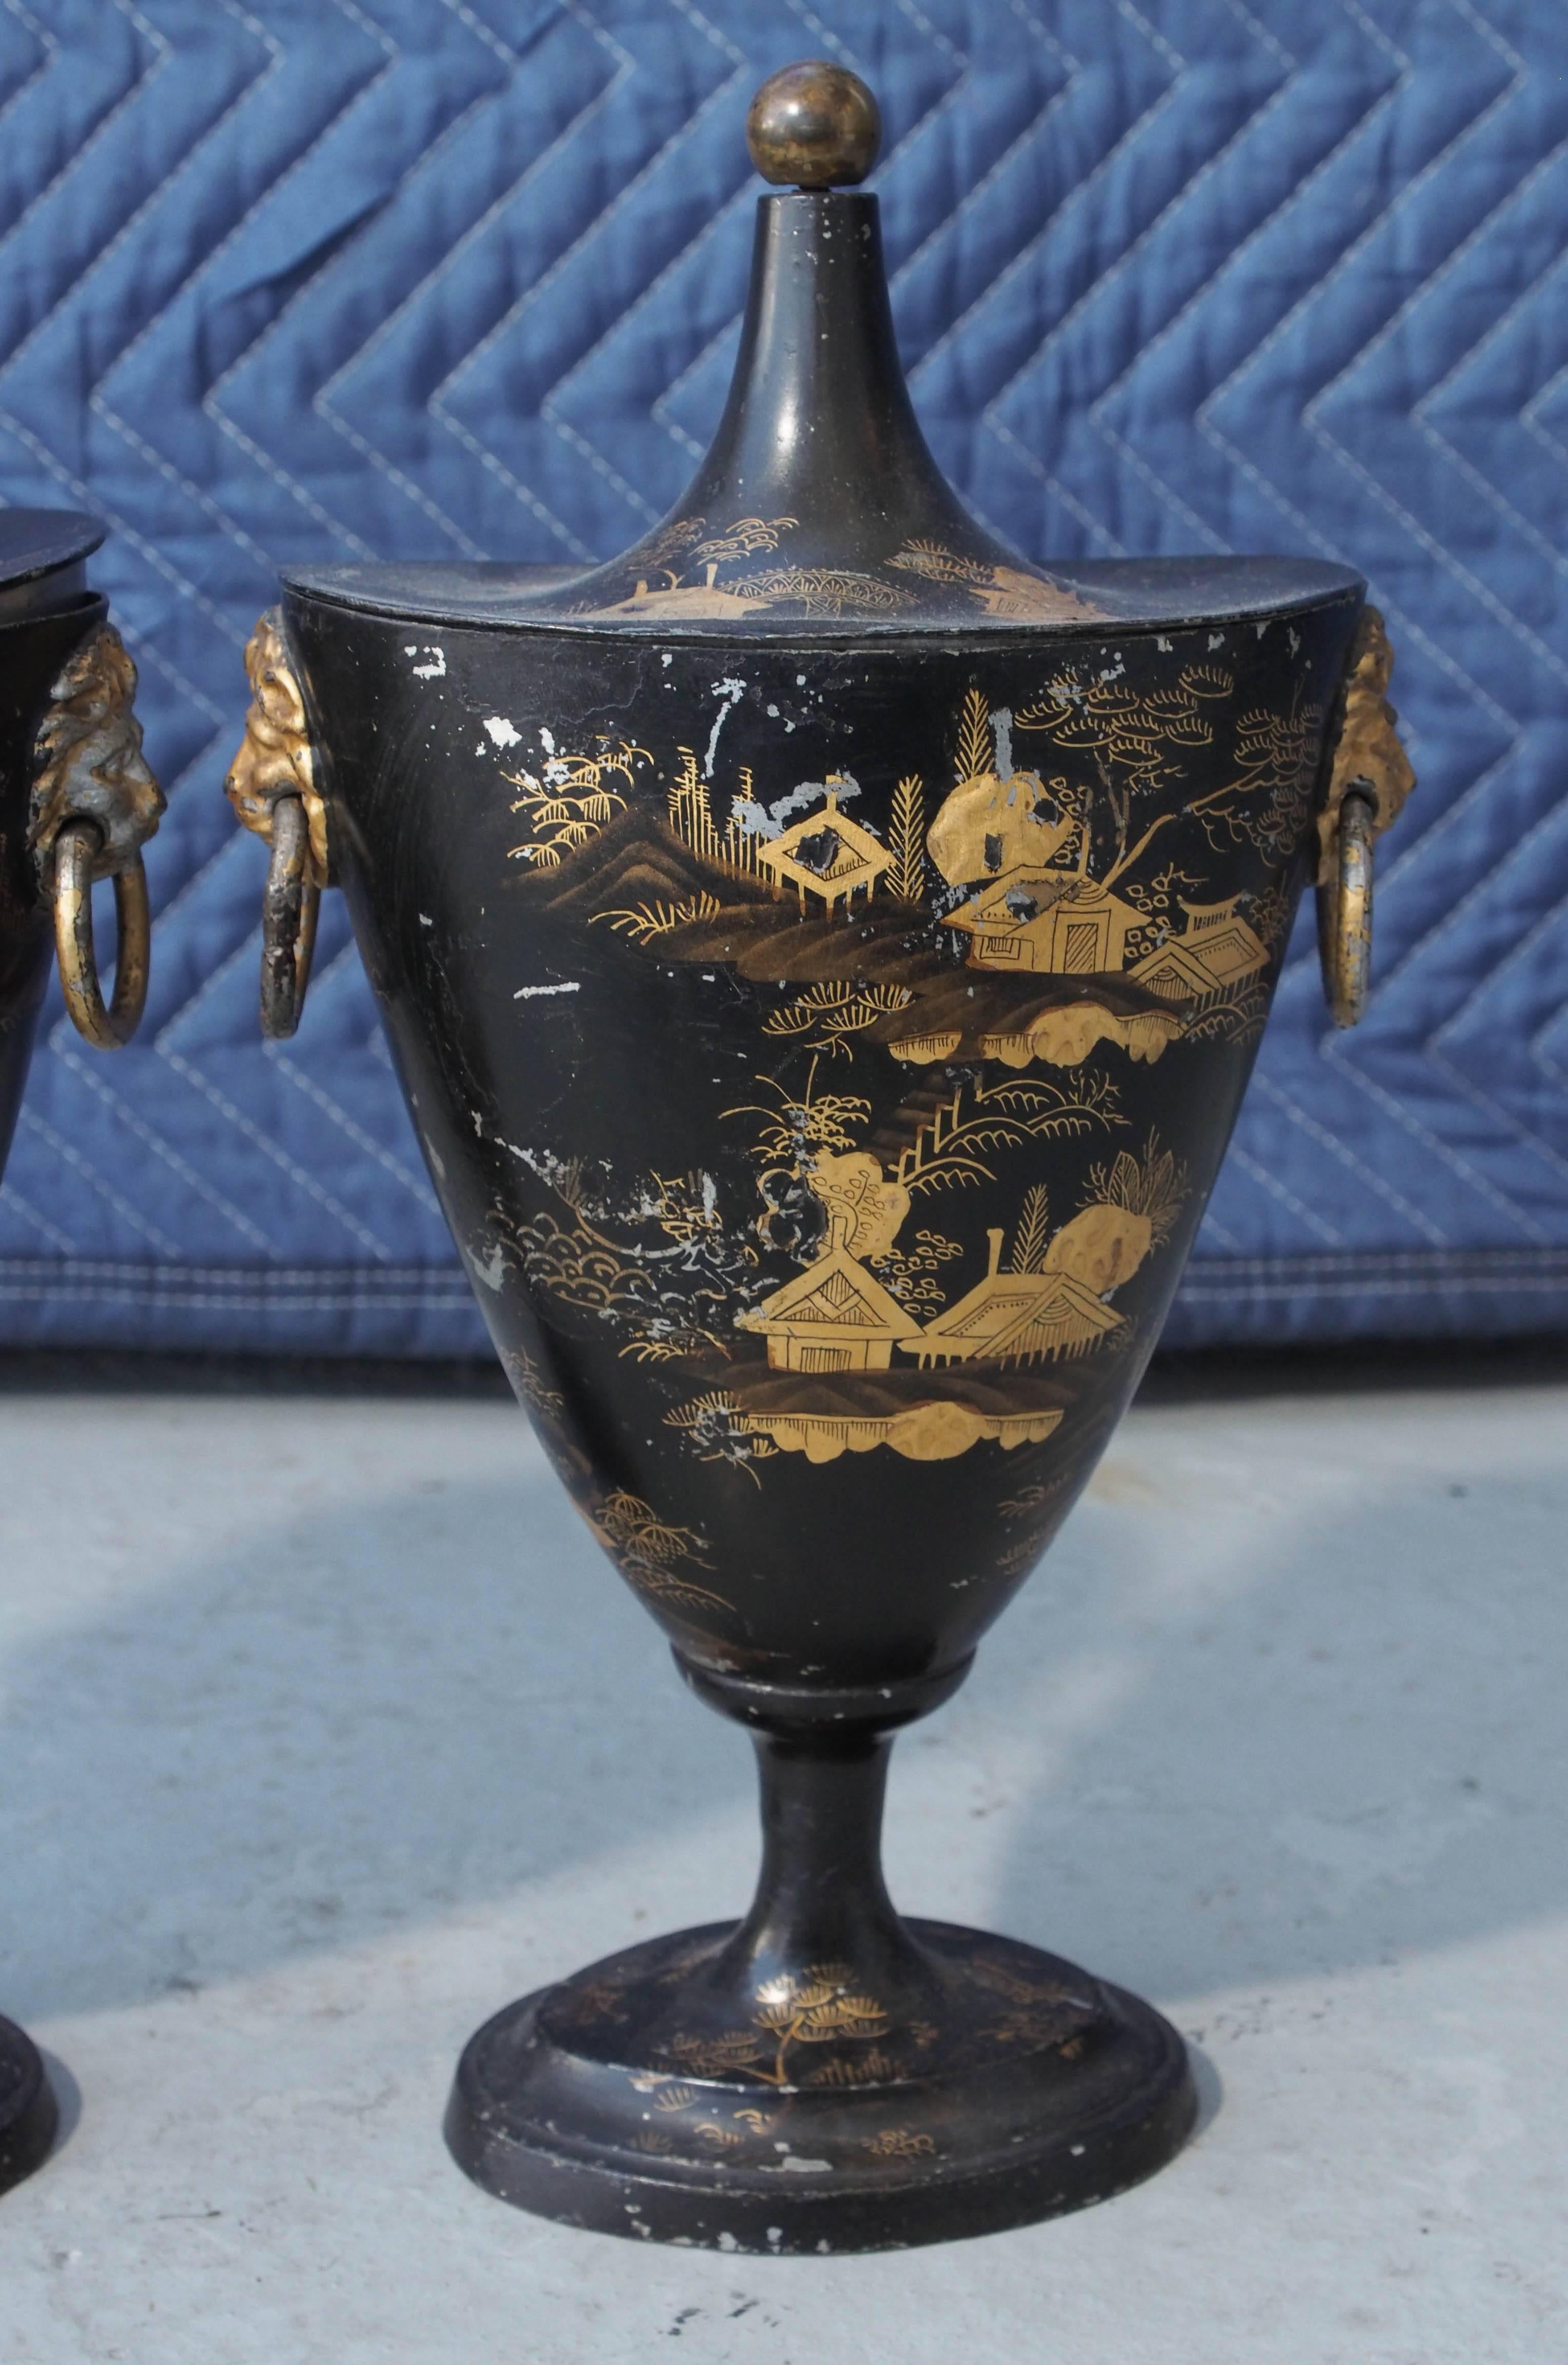 Pair of early 19th century tole chestnut urns with chinoiserie decoration with conical lids in ovoid form. Ringed gilt lions head handles and ball finials.